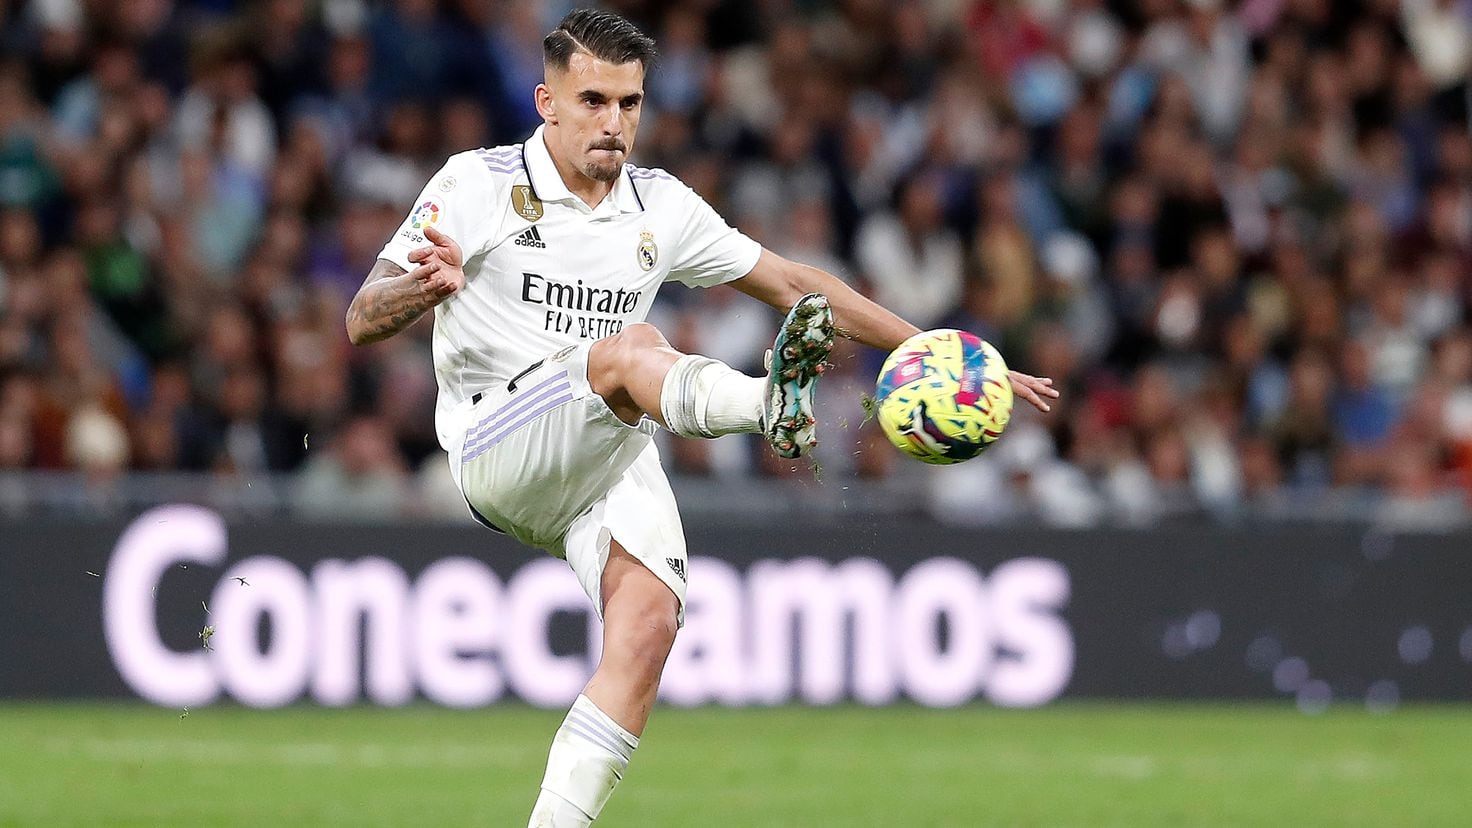 Madrid’s offer to Ceballos: three years, contract improvement…